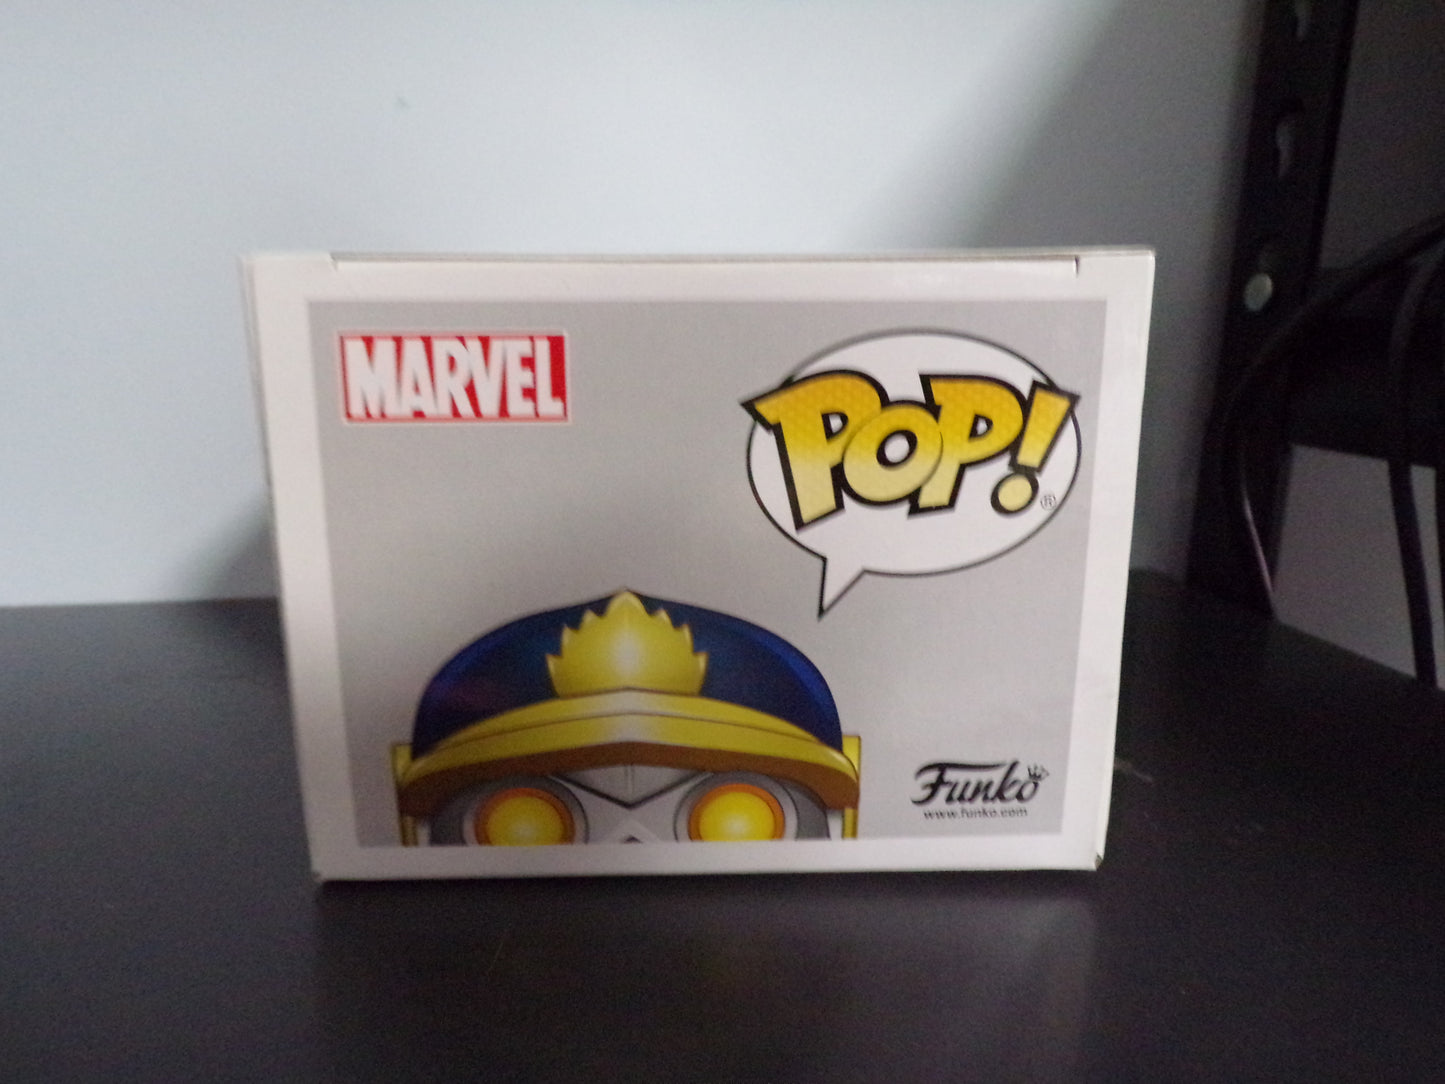 Funko Pop! Marvel - Star-Lord Holloween Comicfest PX Previews Exclusive #395